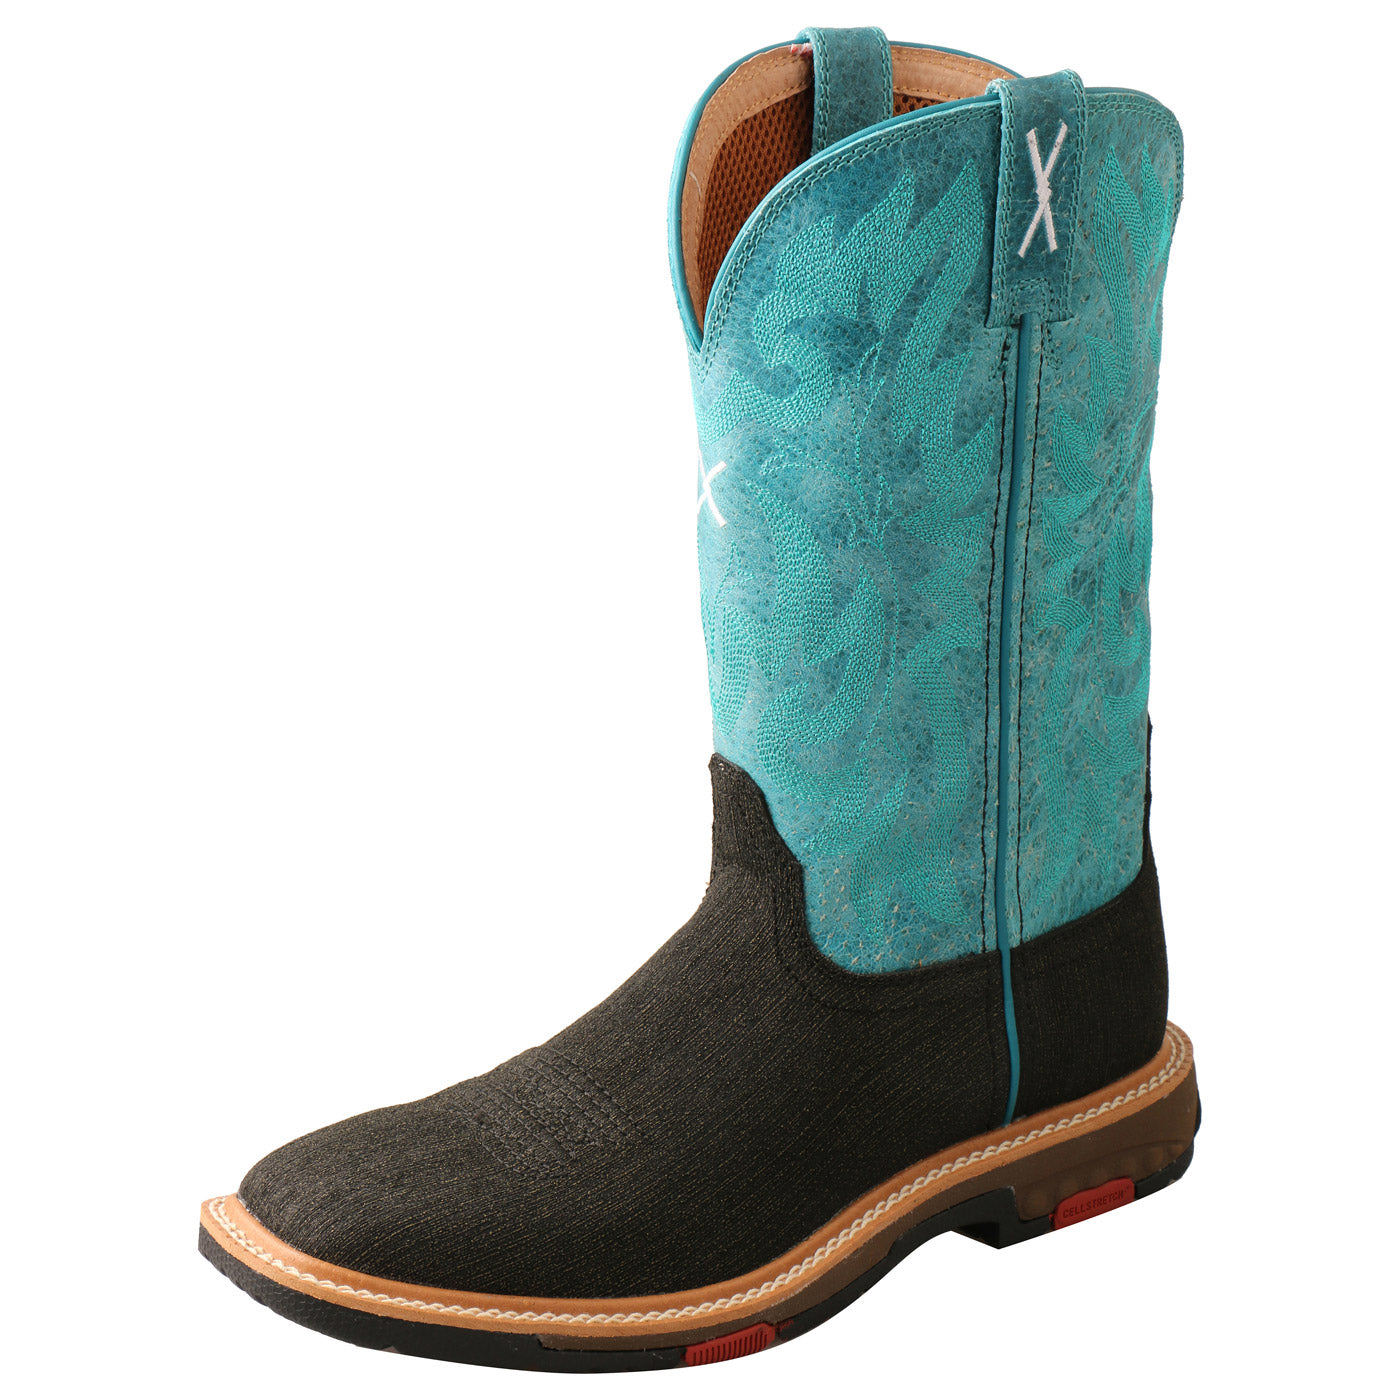 Twisted X 11" Women's Western Work Boot - Charcoal & Turquoise WXB0001